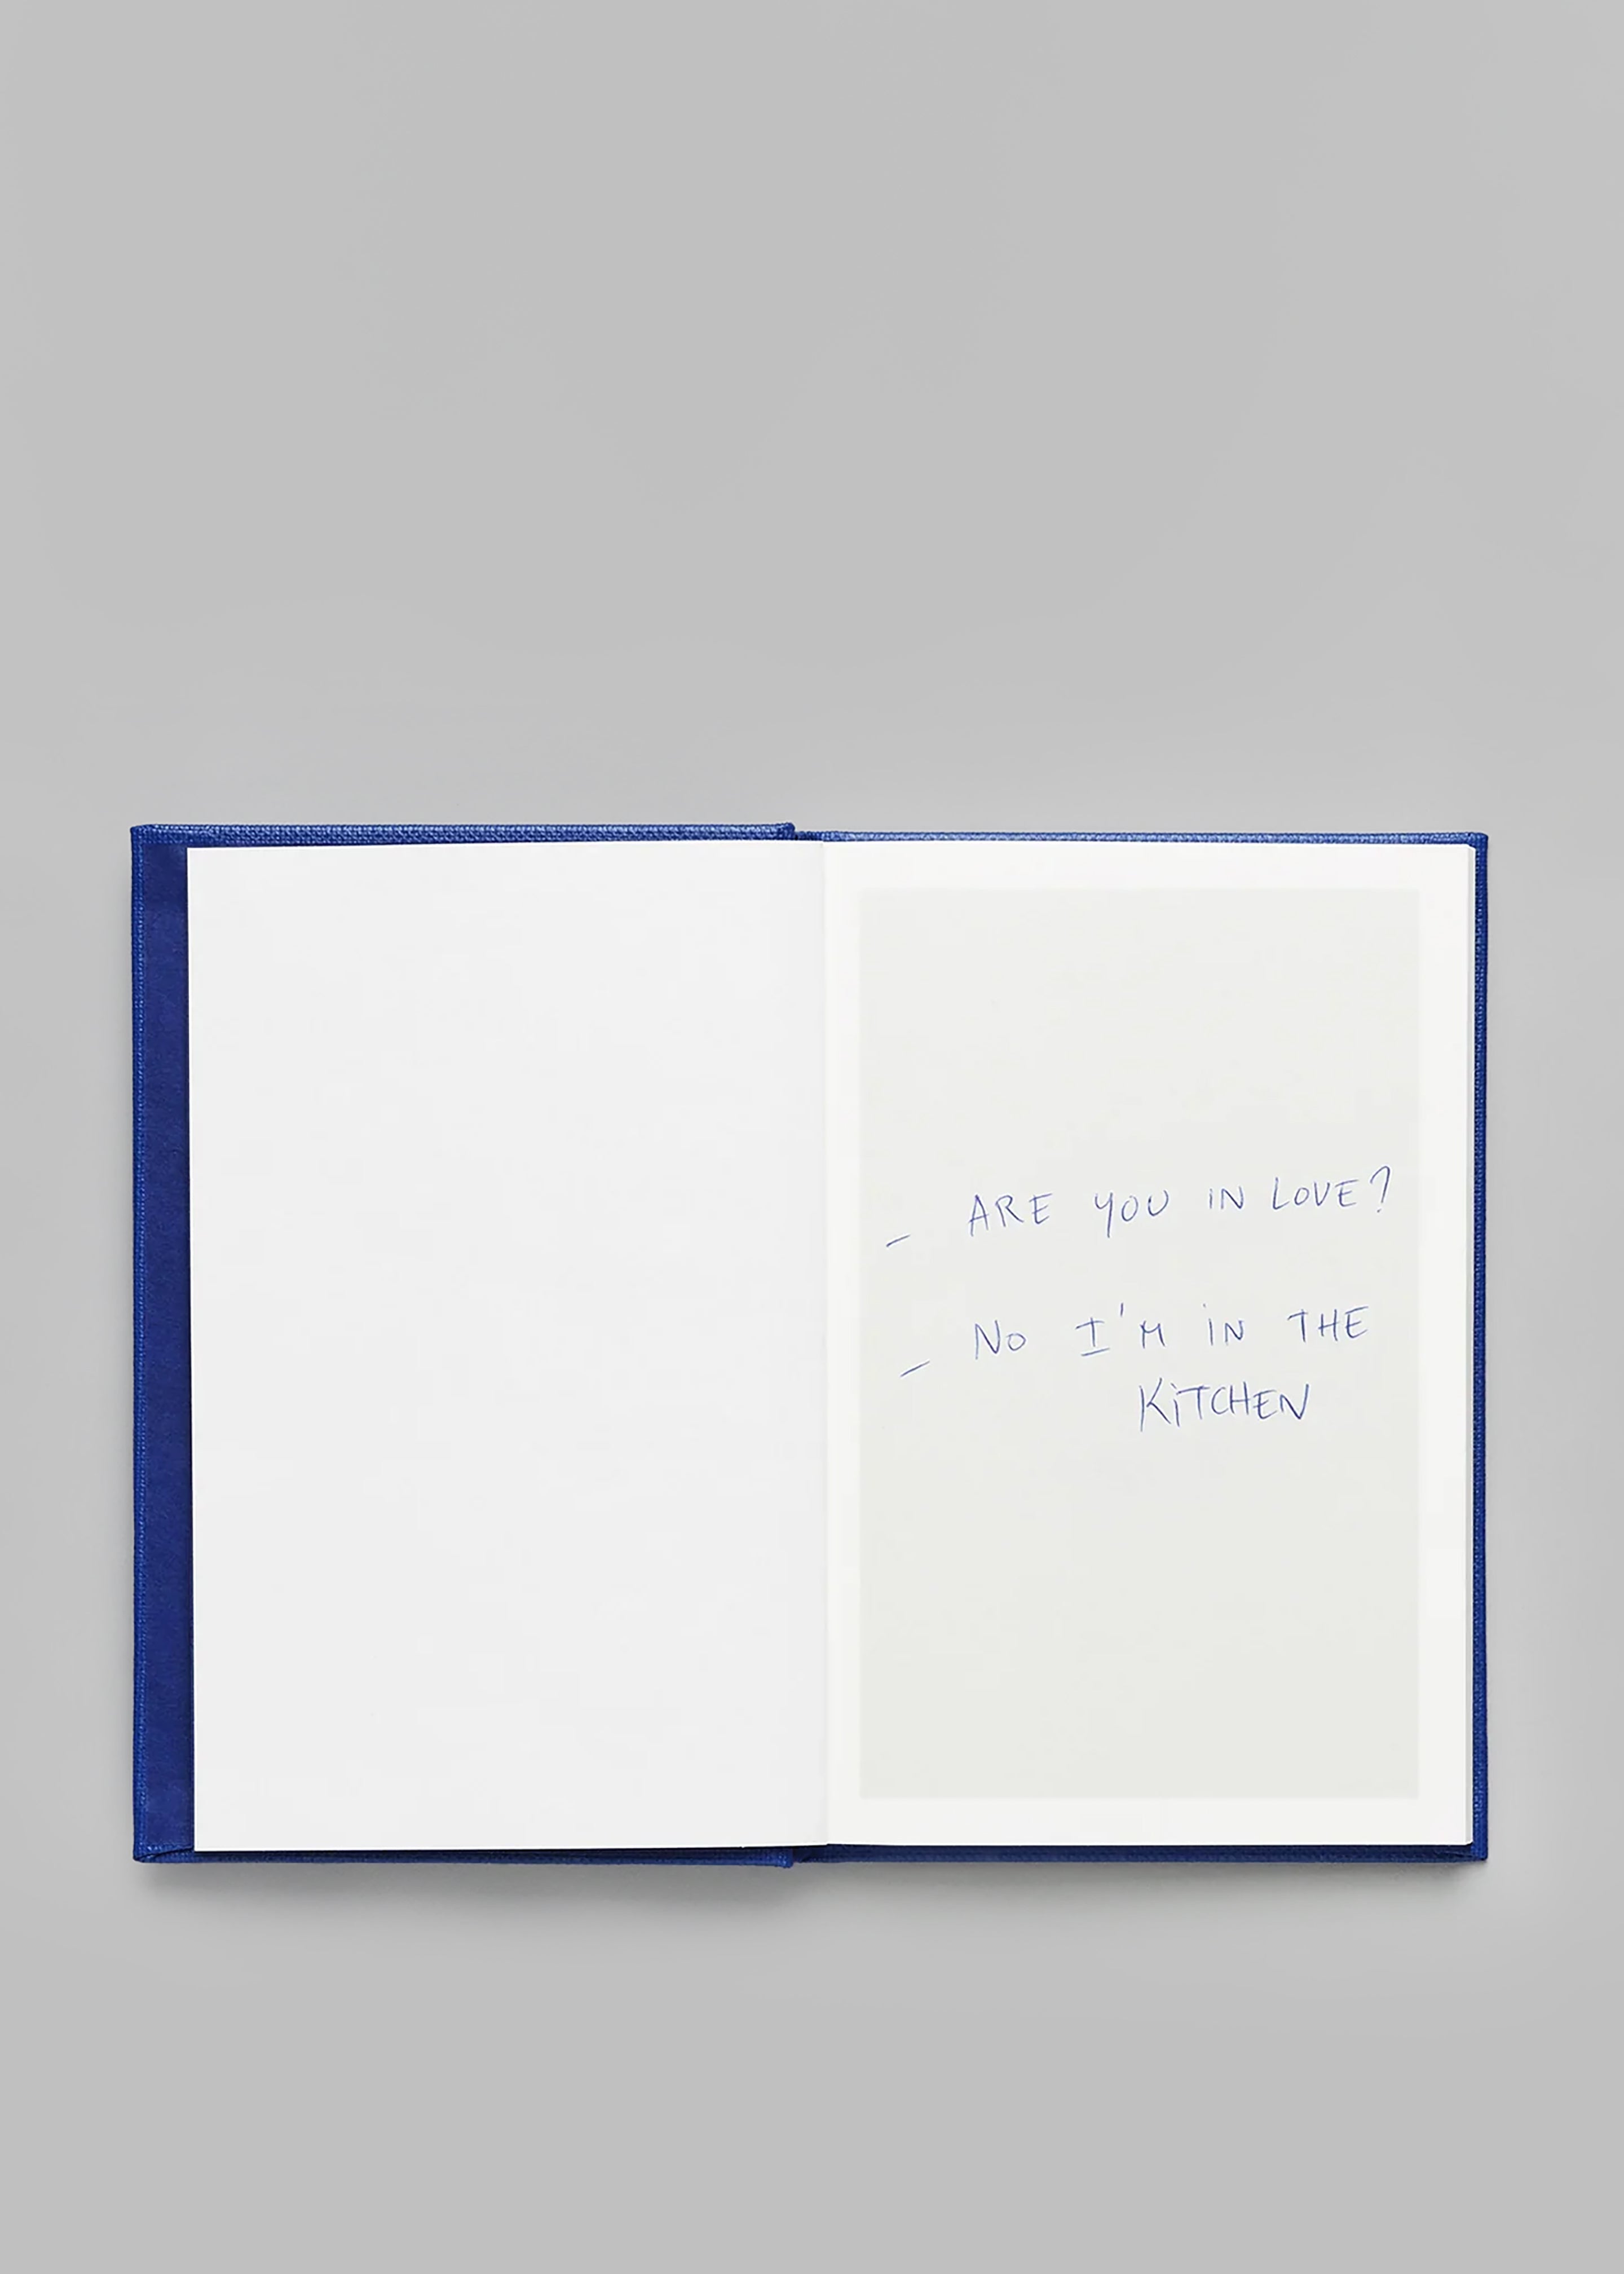 Thomas Lélu 'I Have No Idea What I'm Doing Out of Bed' Book - 2